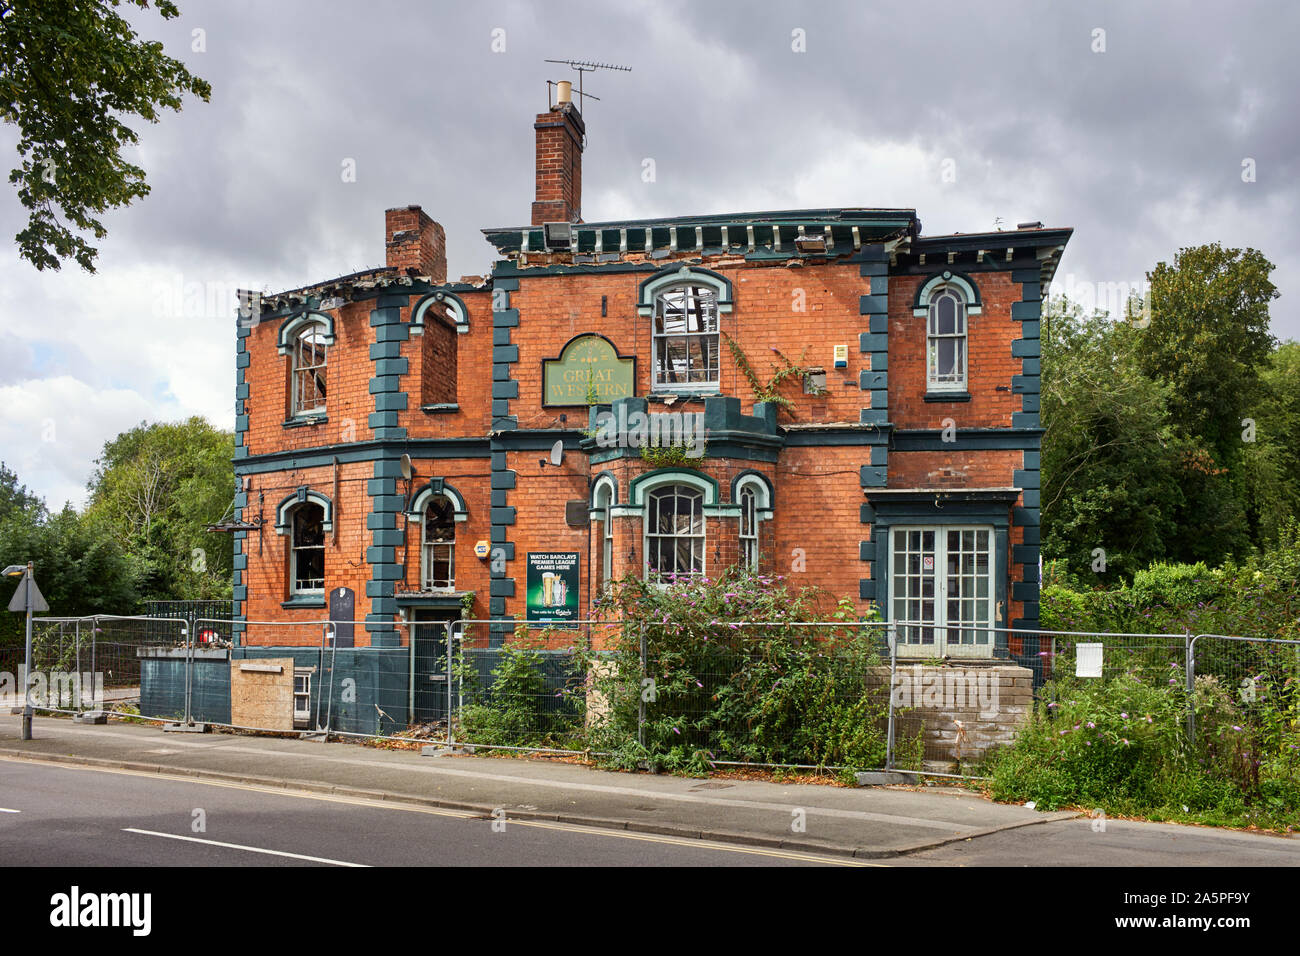 The fire damaged Great Western Public house in Warwick partially demolished Stock Photo